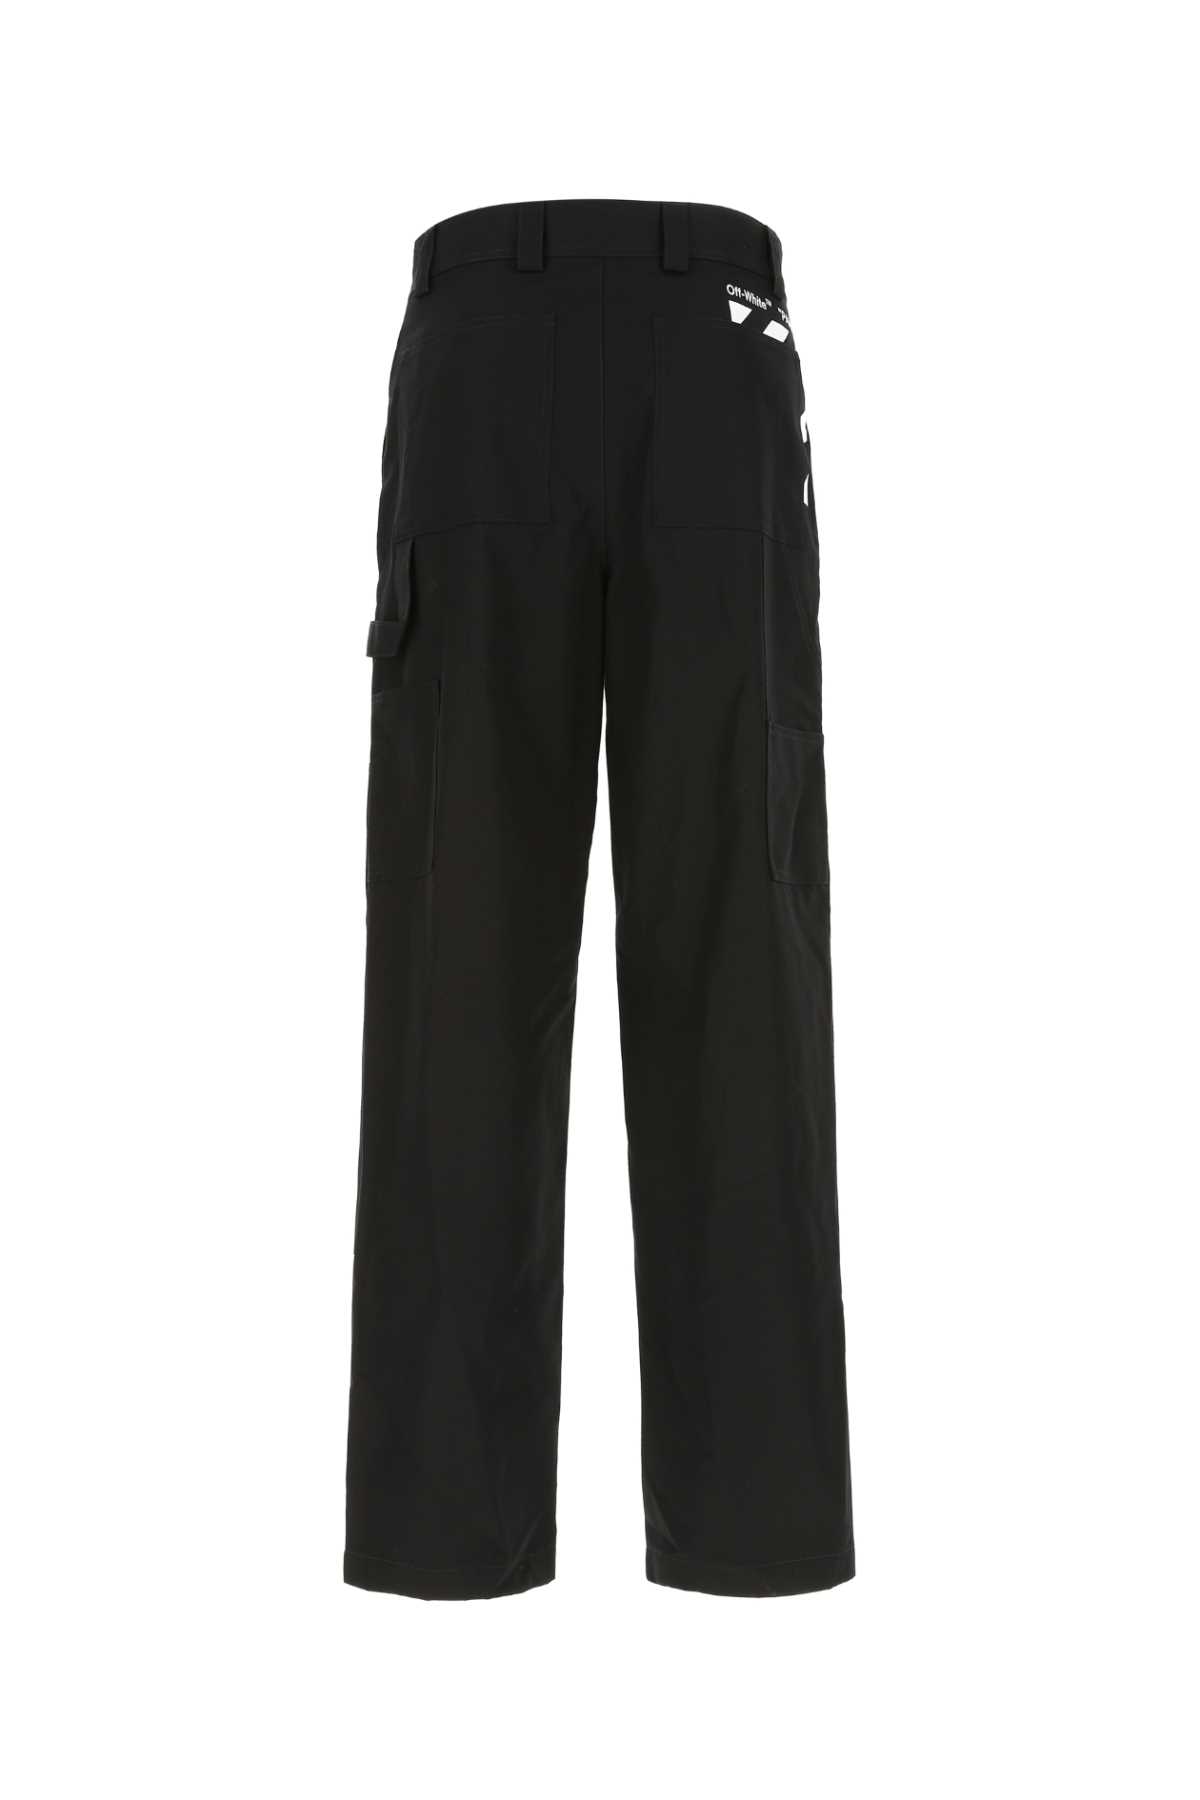 Off-white Black Cotton Wide-leg Pant In 1001